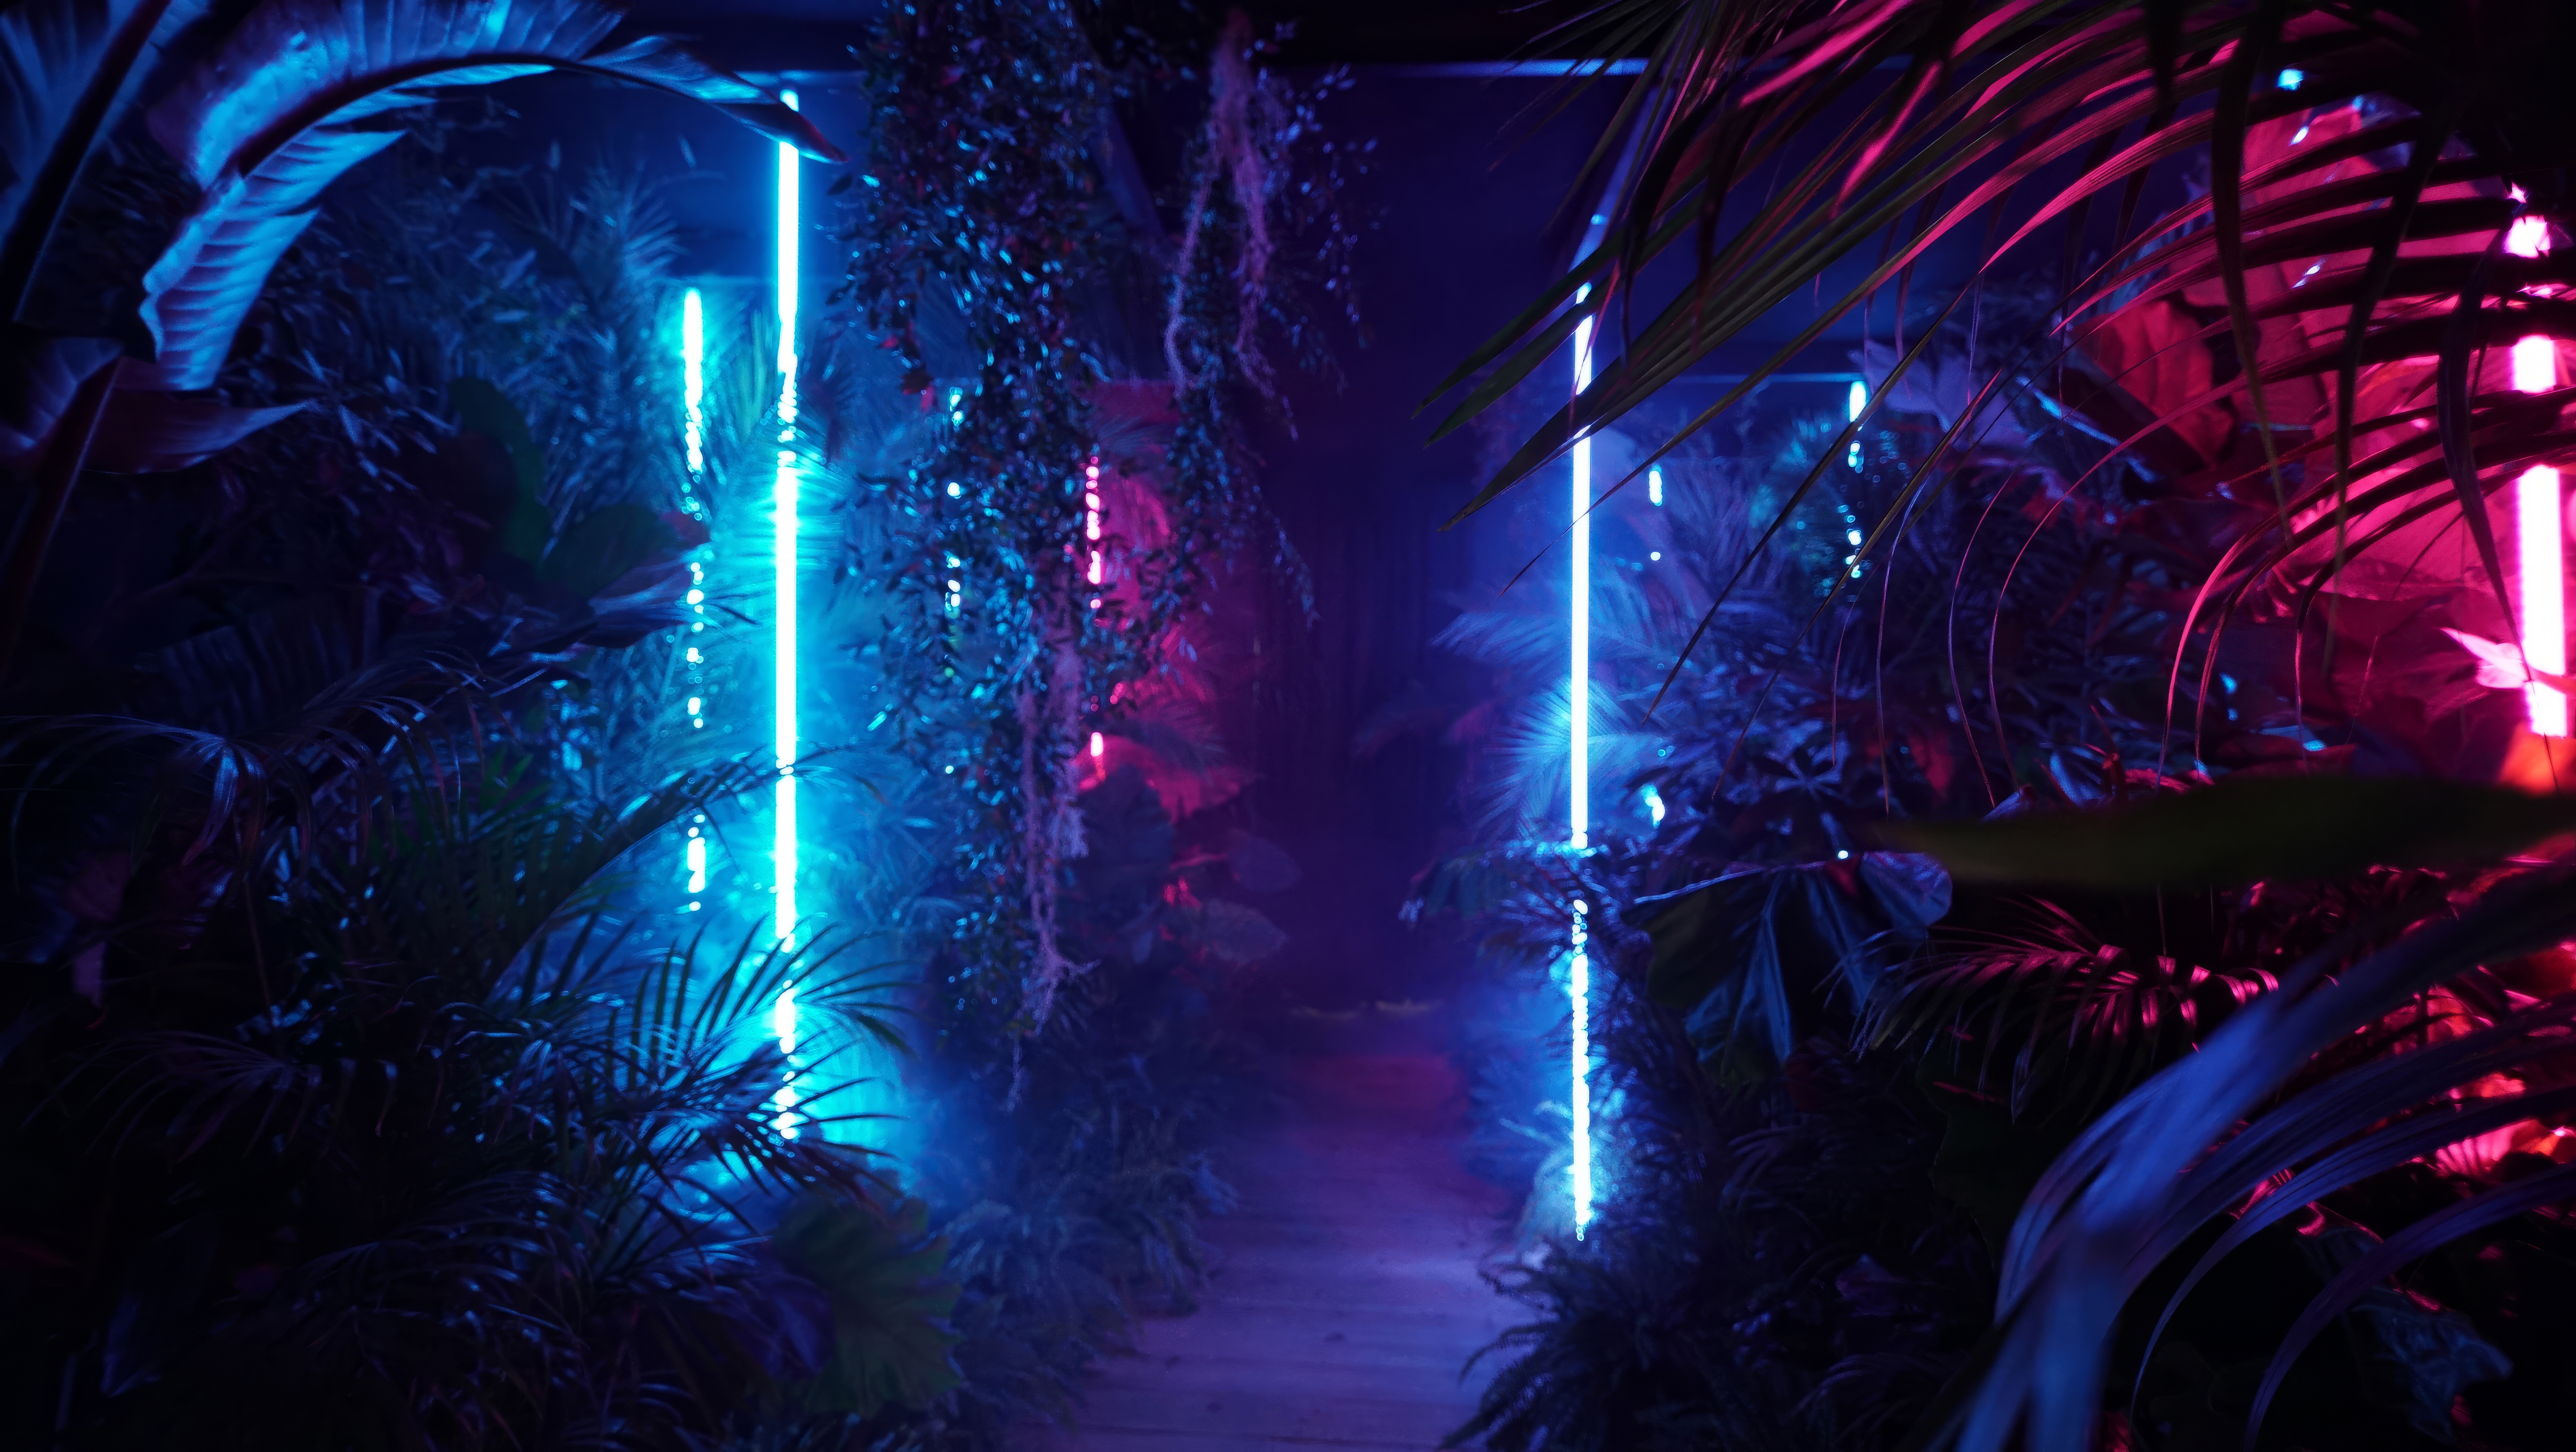 Plants Ferns Exotic Neon Lights Blue Pink Glowing 5536x3120